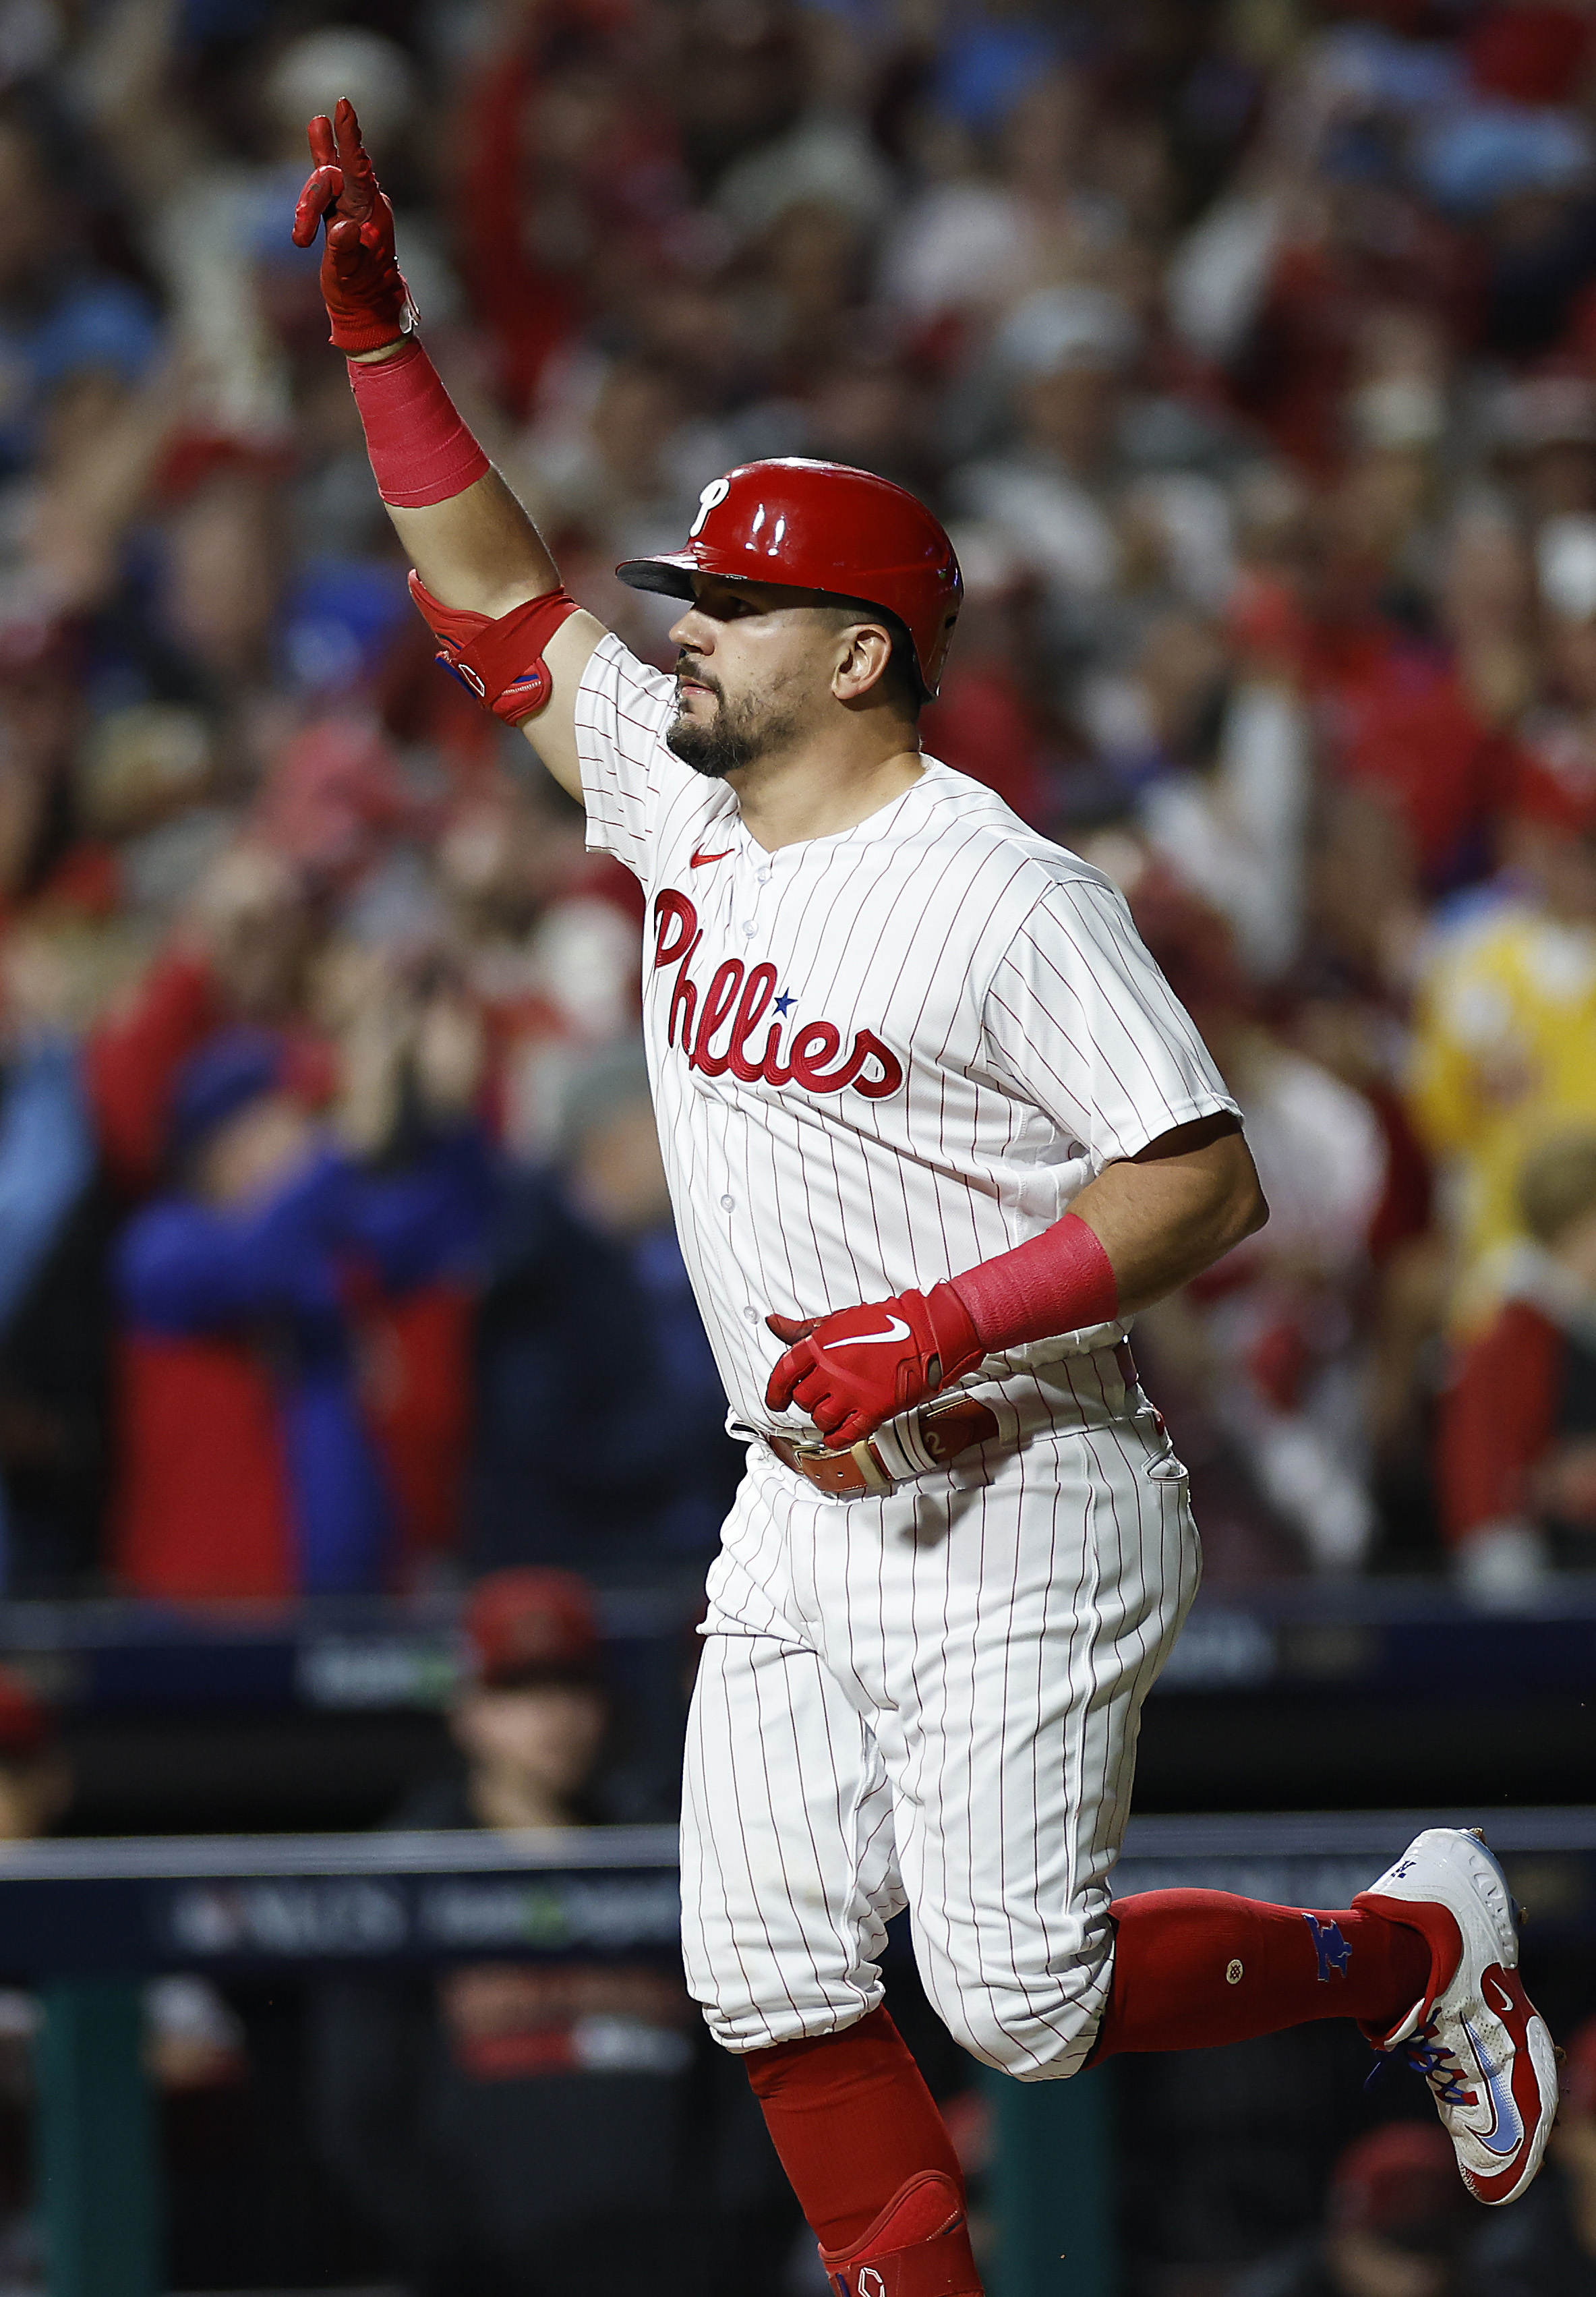 Kyle Schwarber heating up right on schedule as the Phillies make